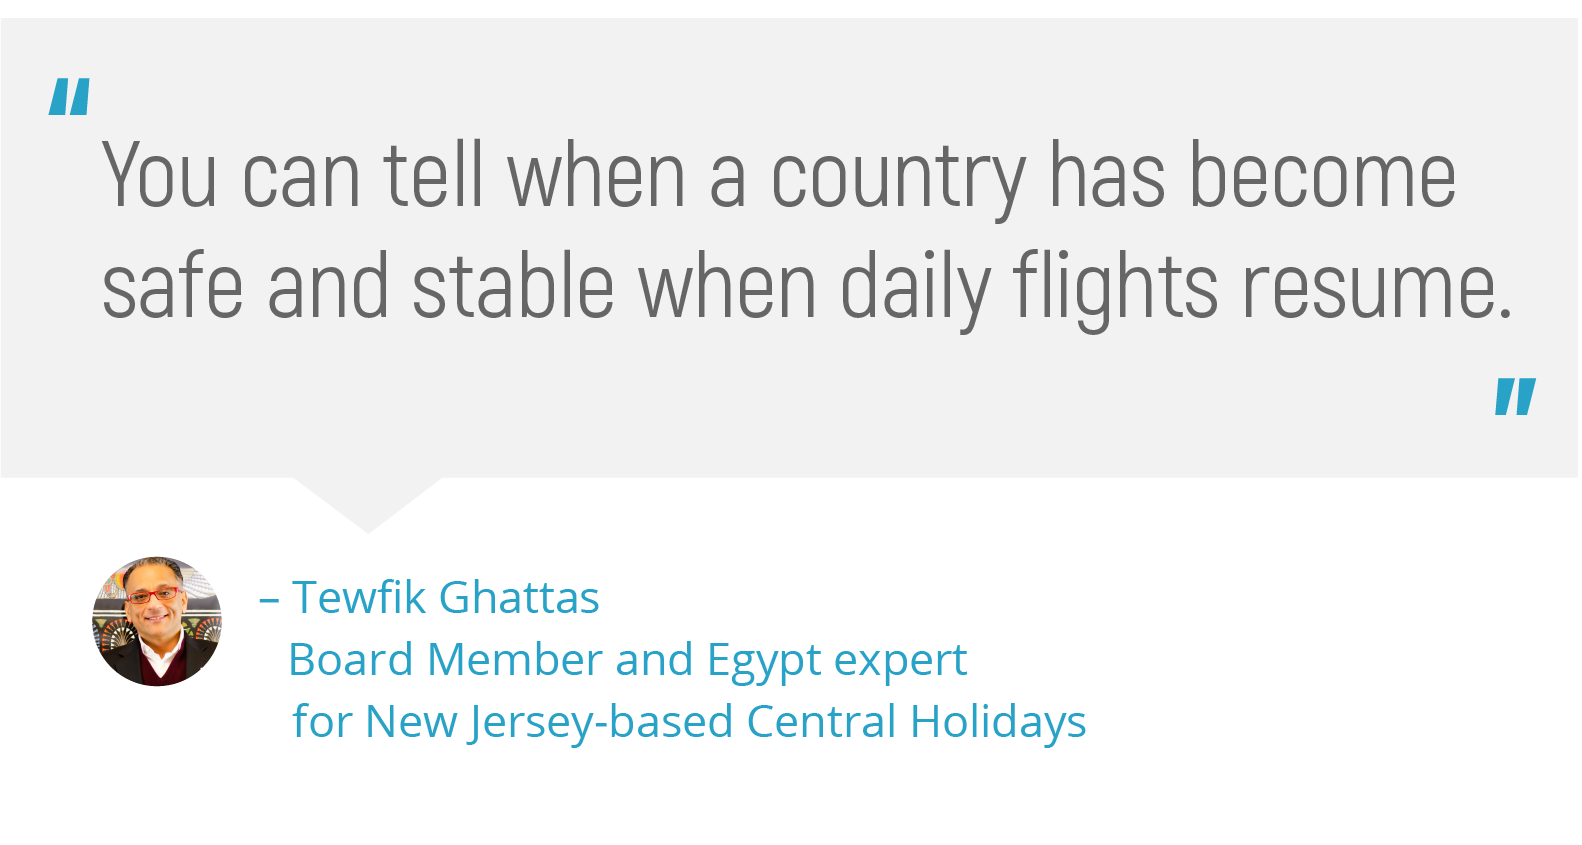 "You can tell when a country has become safe and stable when daily flights resume."